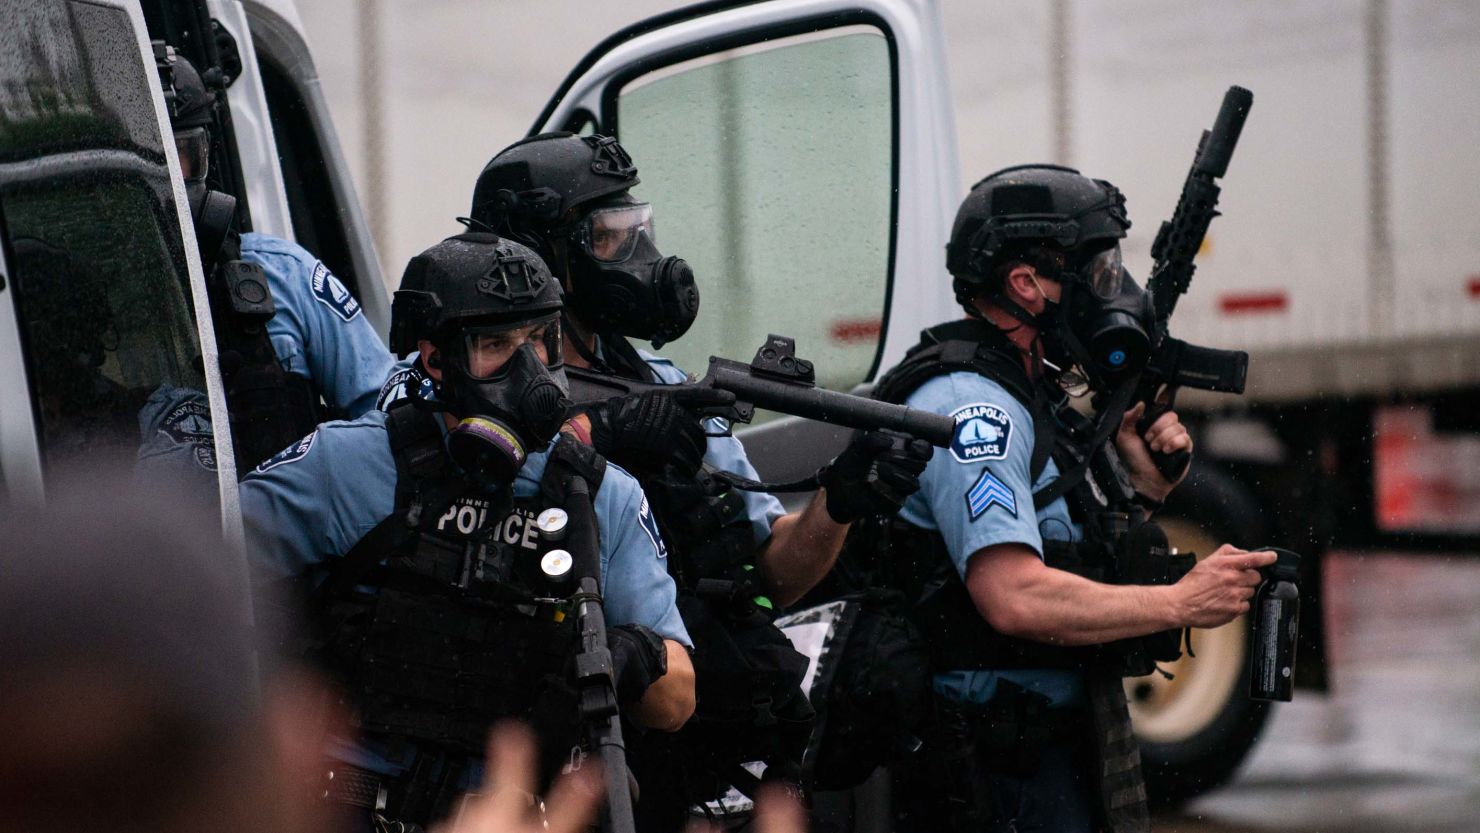 Police dressed in tactical gear attempt to disperse crowds gathered to protest the death of George Floyd outside the 3rd Precinct Police Station on May 26, 2020 in Minneapolis, Minnesota. 